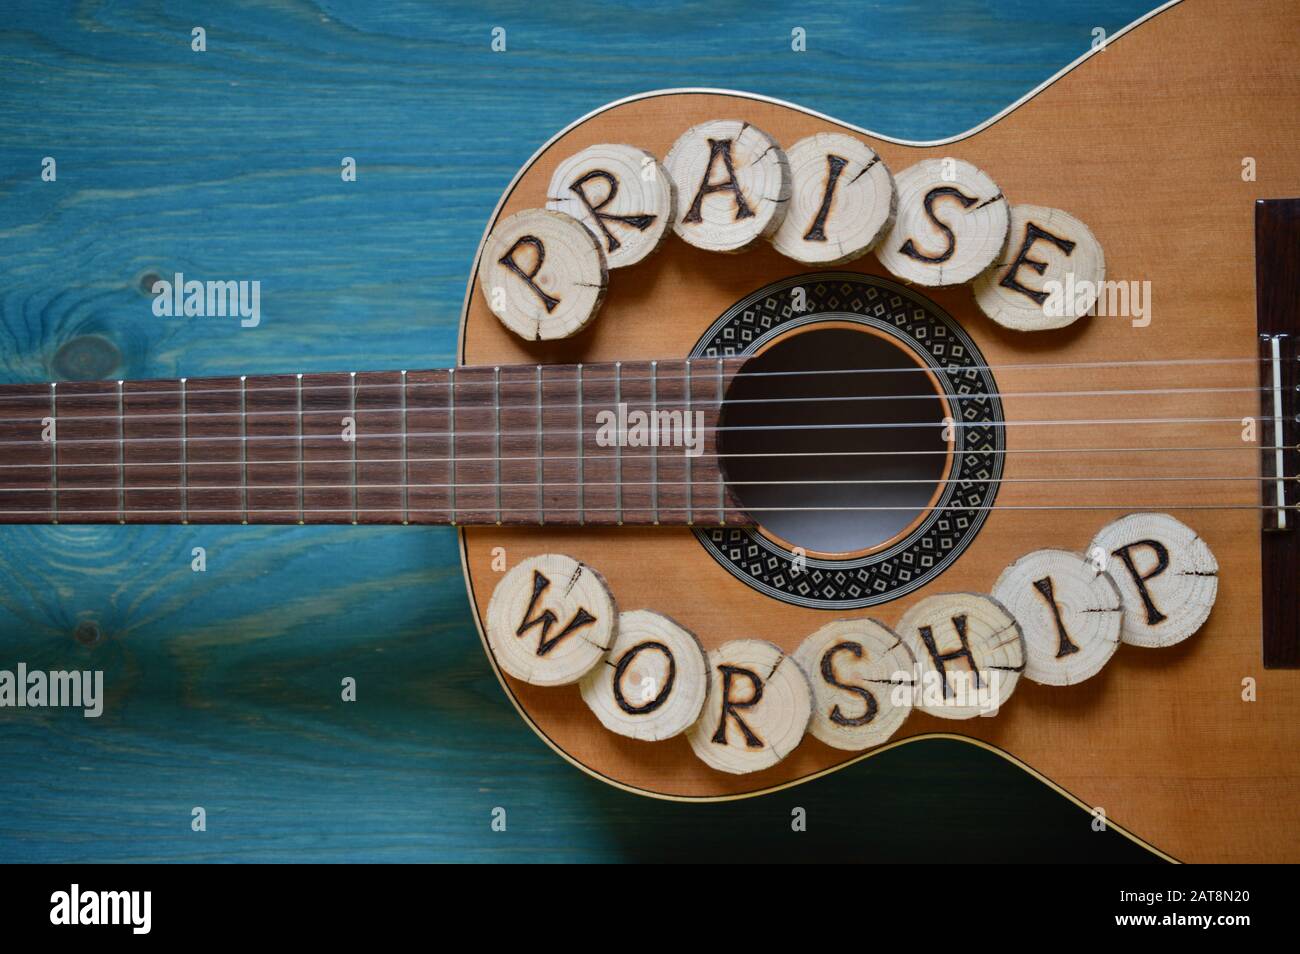 guitar on teal wooden background with wood pieces on it lettering the words: PRAISE and WORSHIP Stock Photo